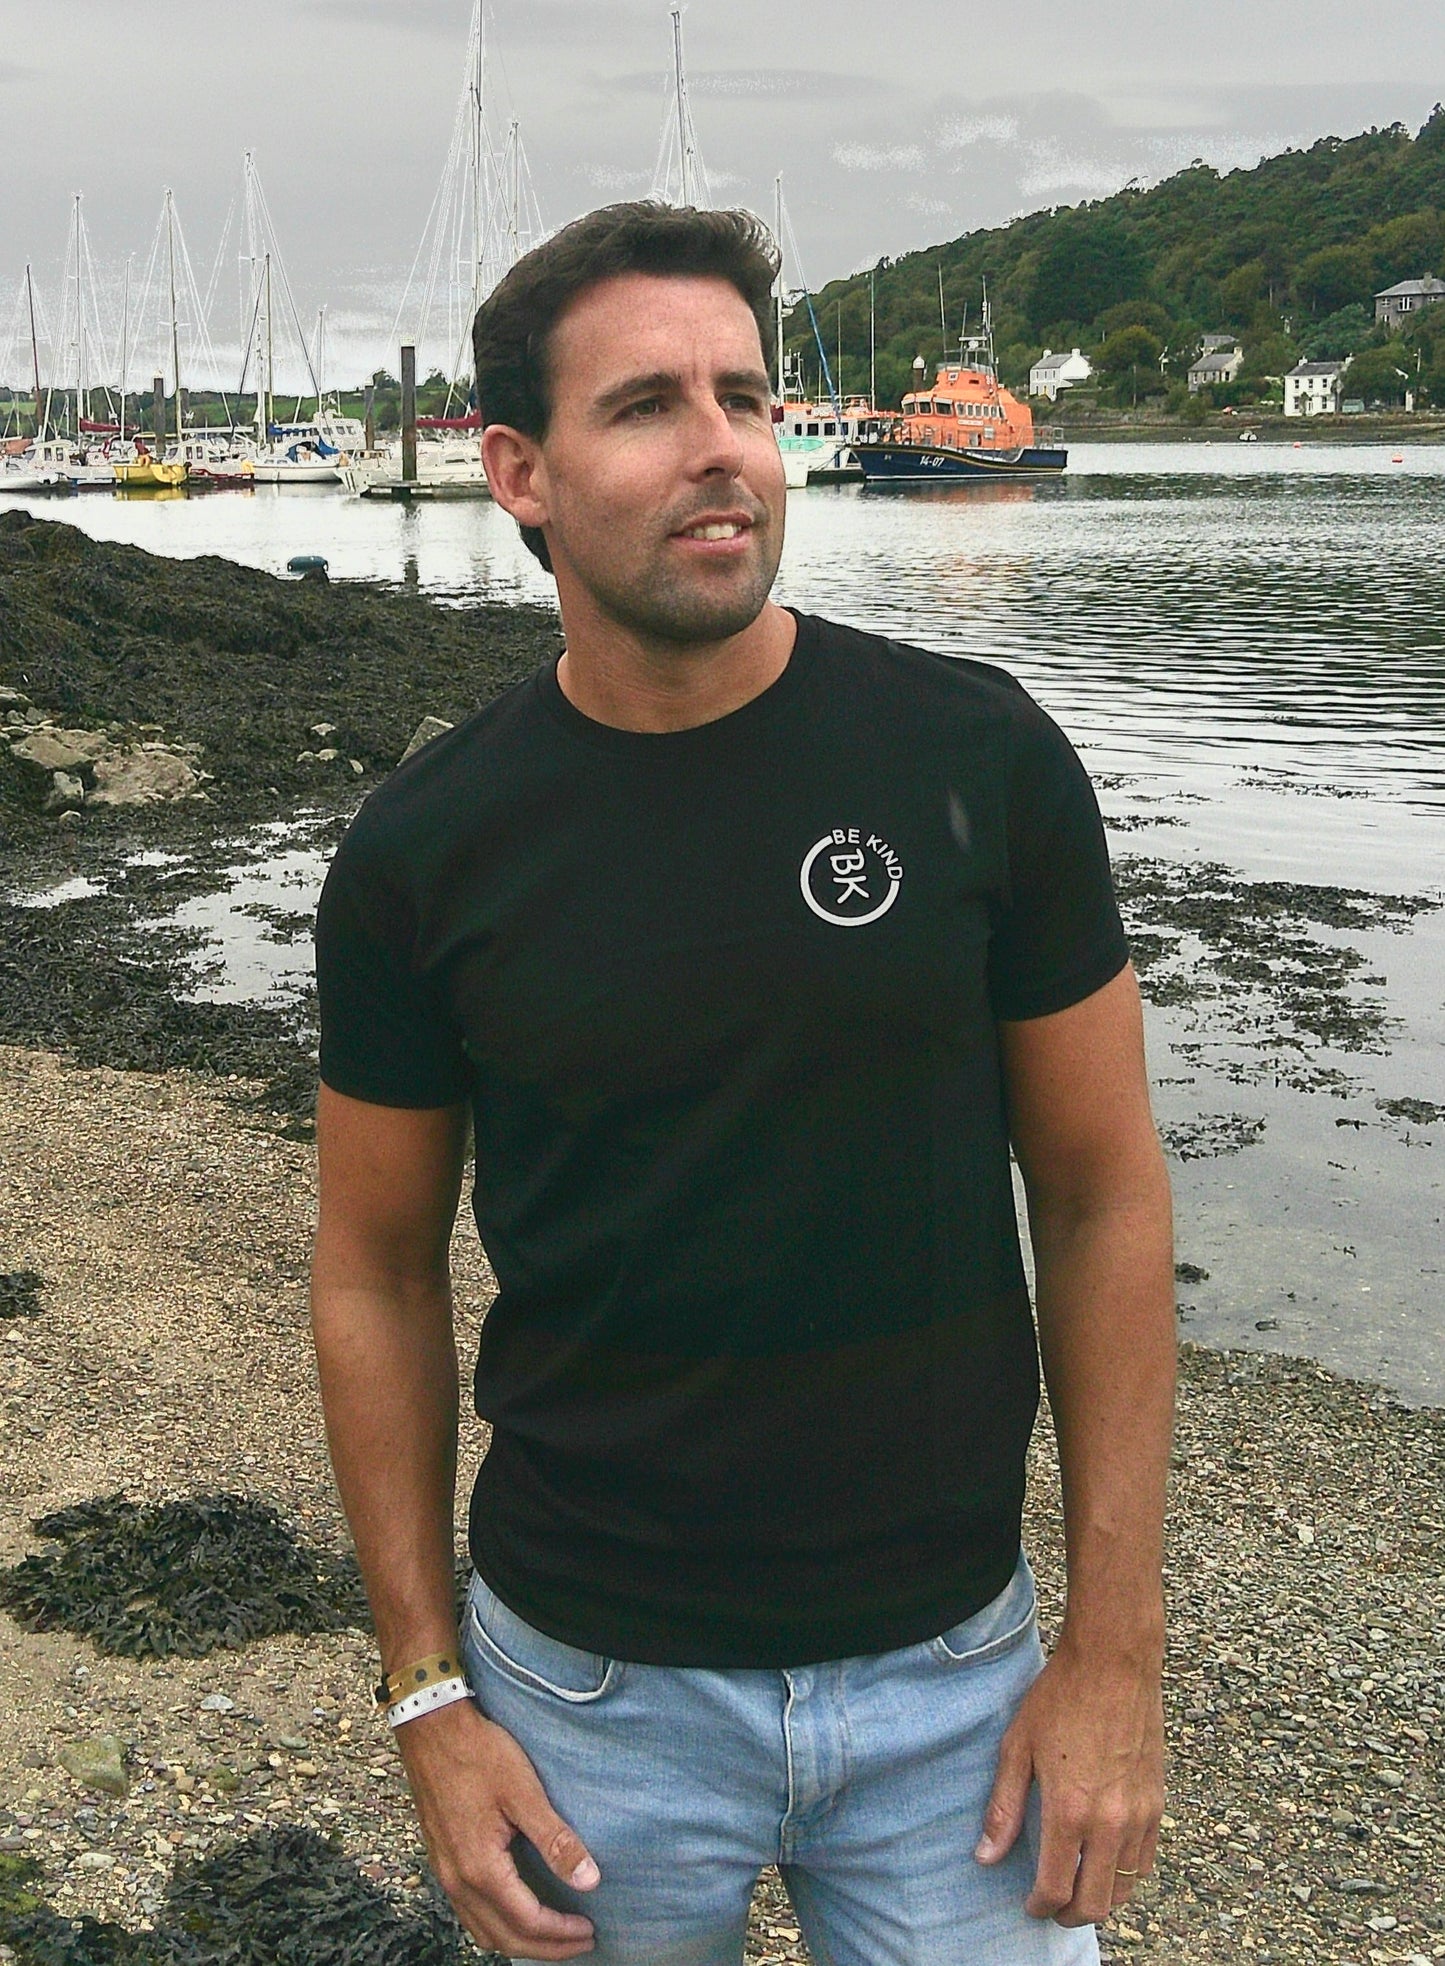 A man stands on a beach, he's wearing a Black Organic Cotton Connector T-Shirt from the Be Kind Apparel Connector Range